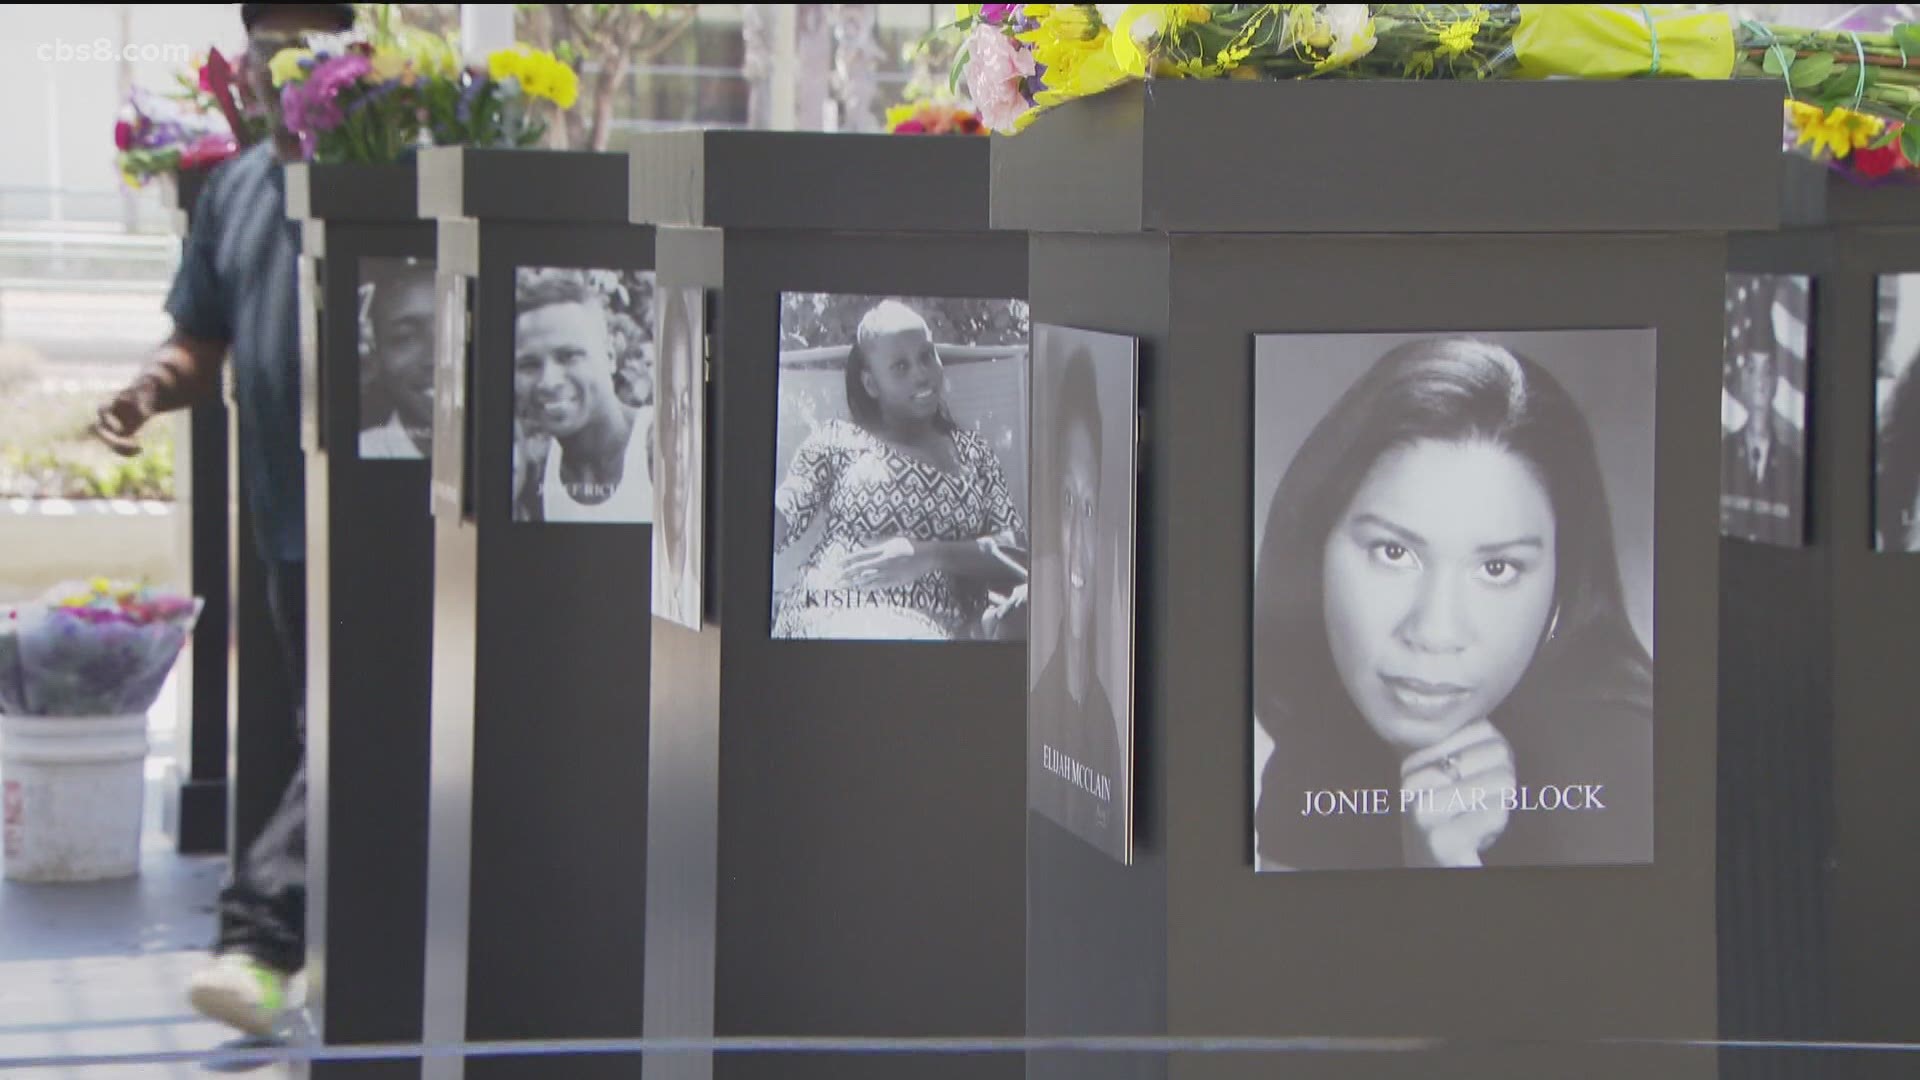 The new exhibit is put on by the African-American Museum of Fine Arts features 200 photos of Black people who have died due to racial violence or injustice.